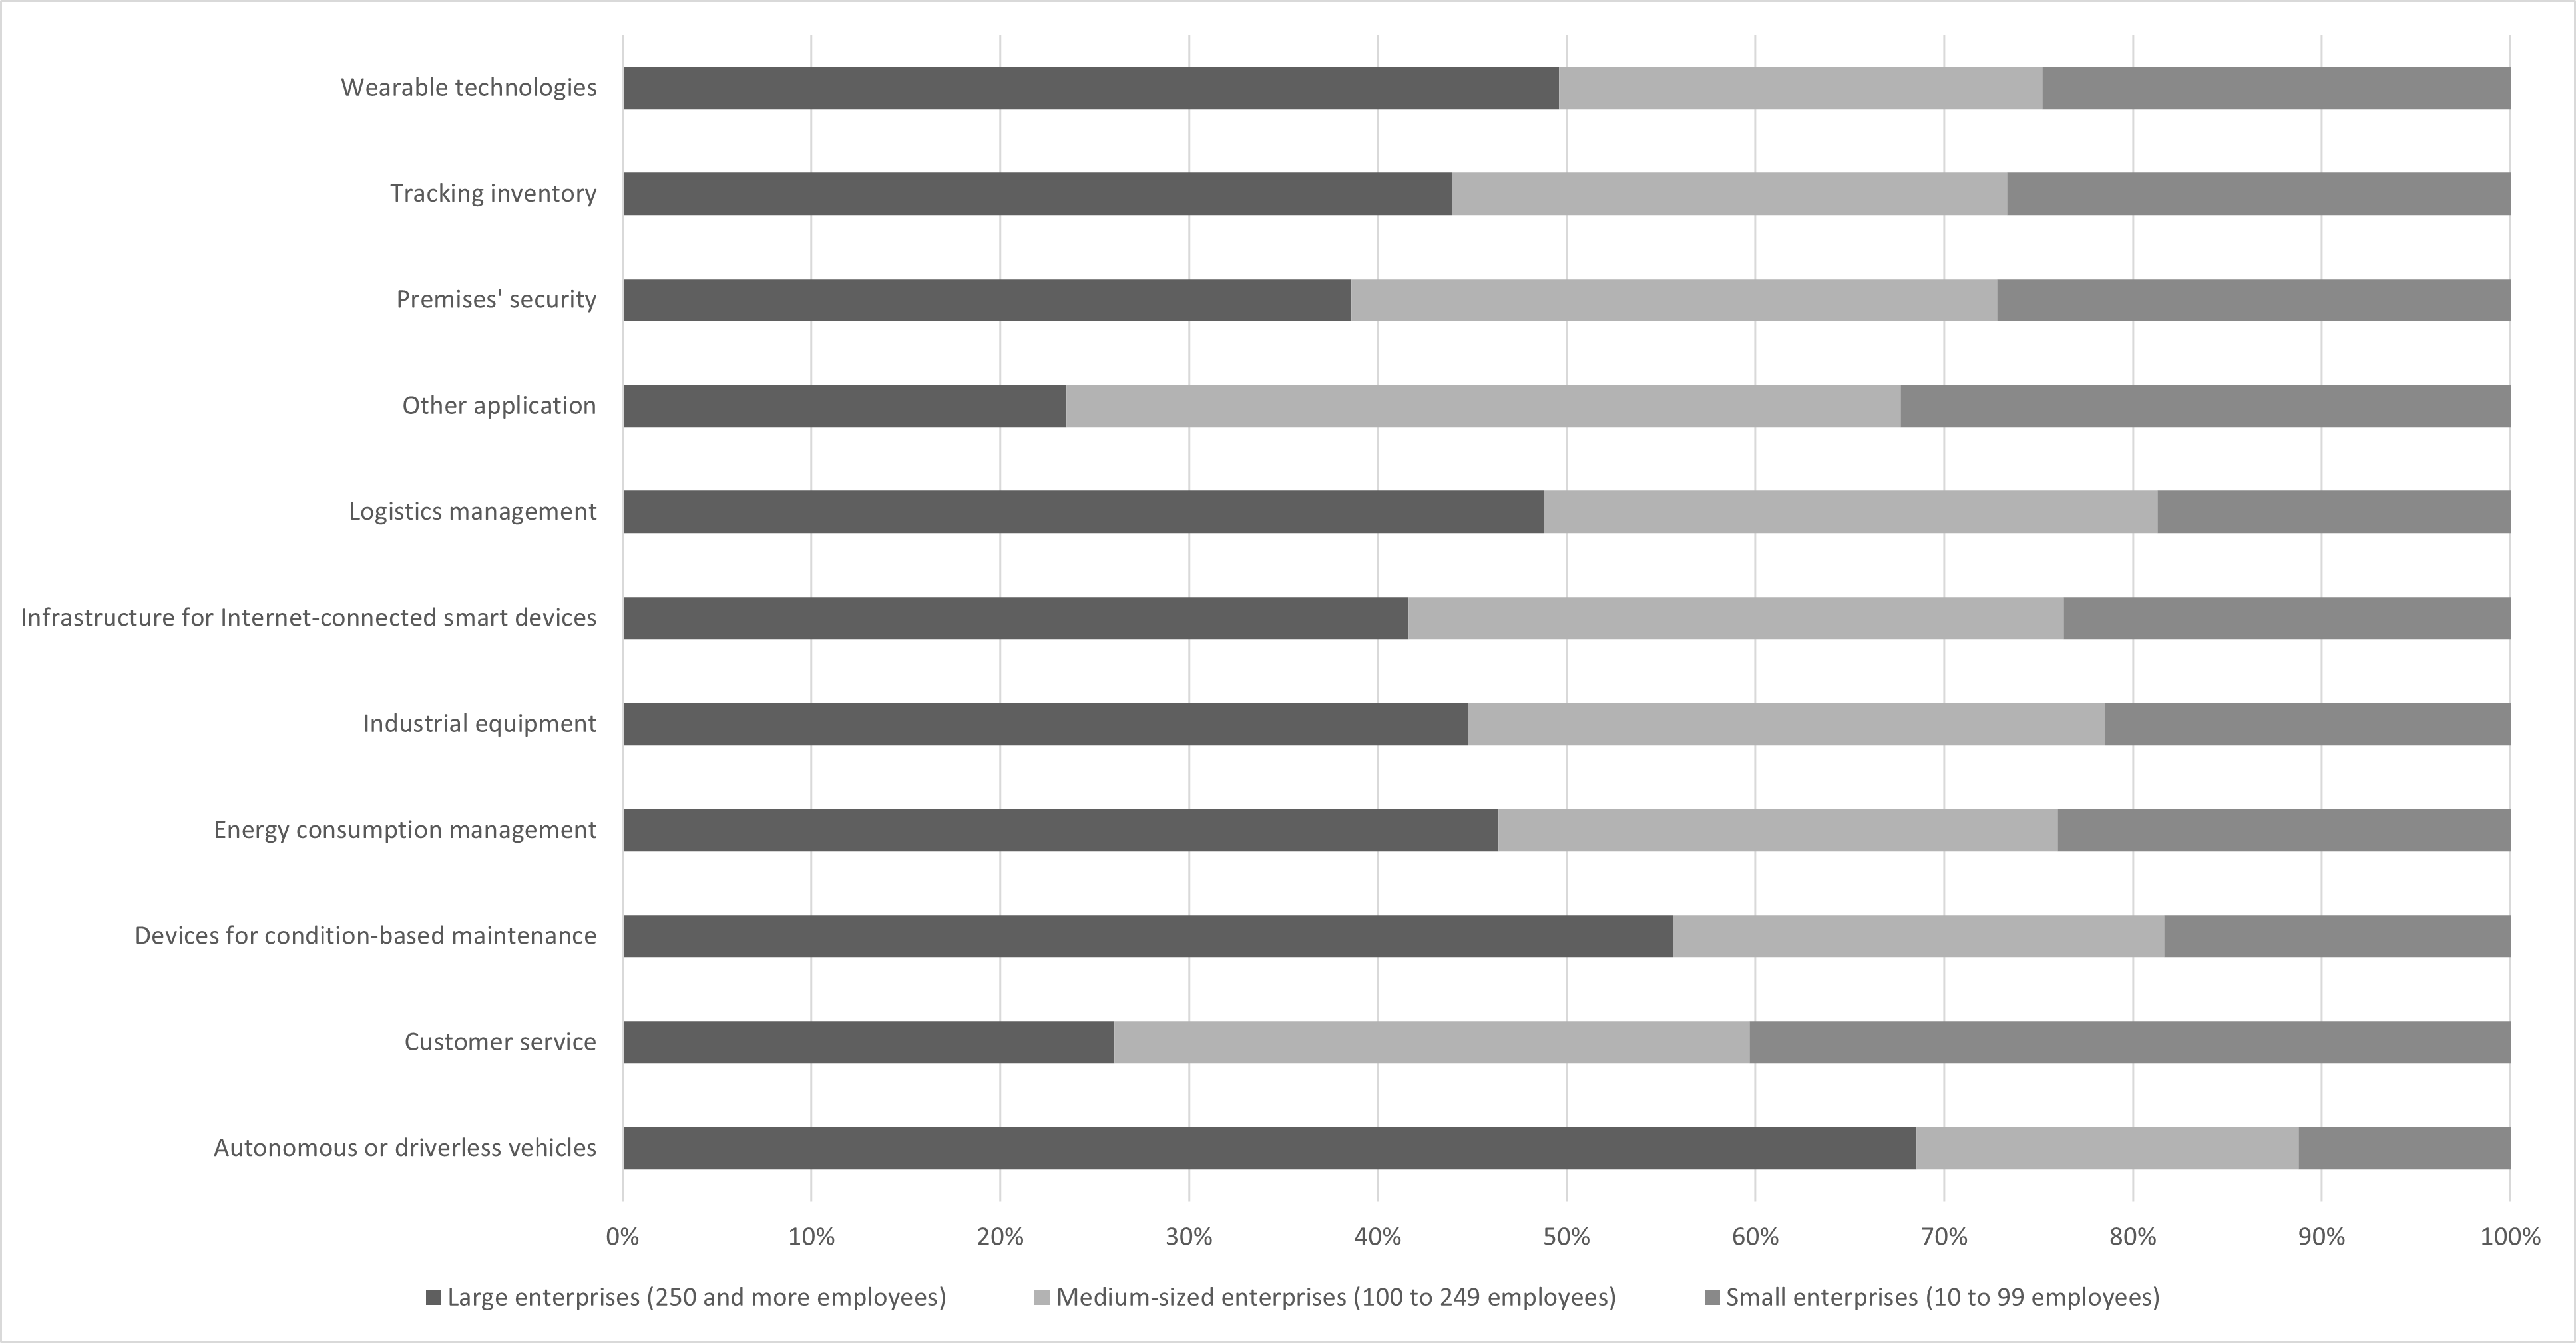 Summary of application use by type, in percent for all industries in Canada